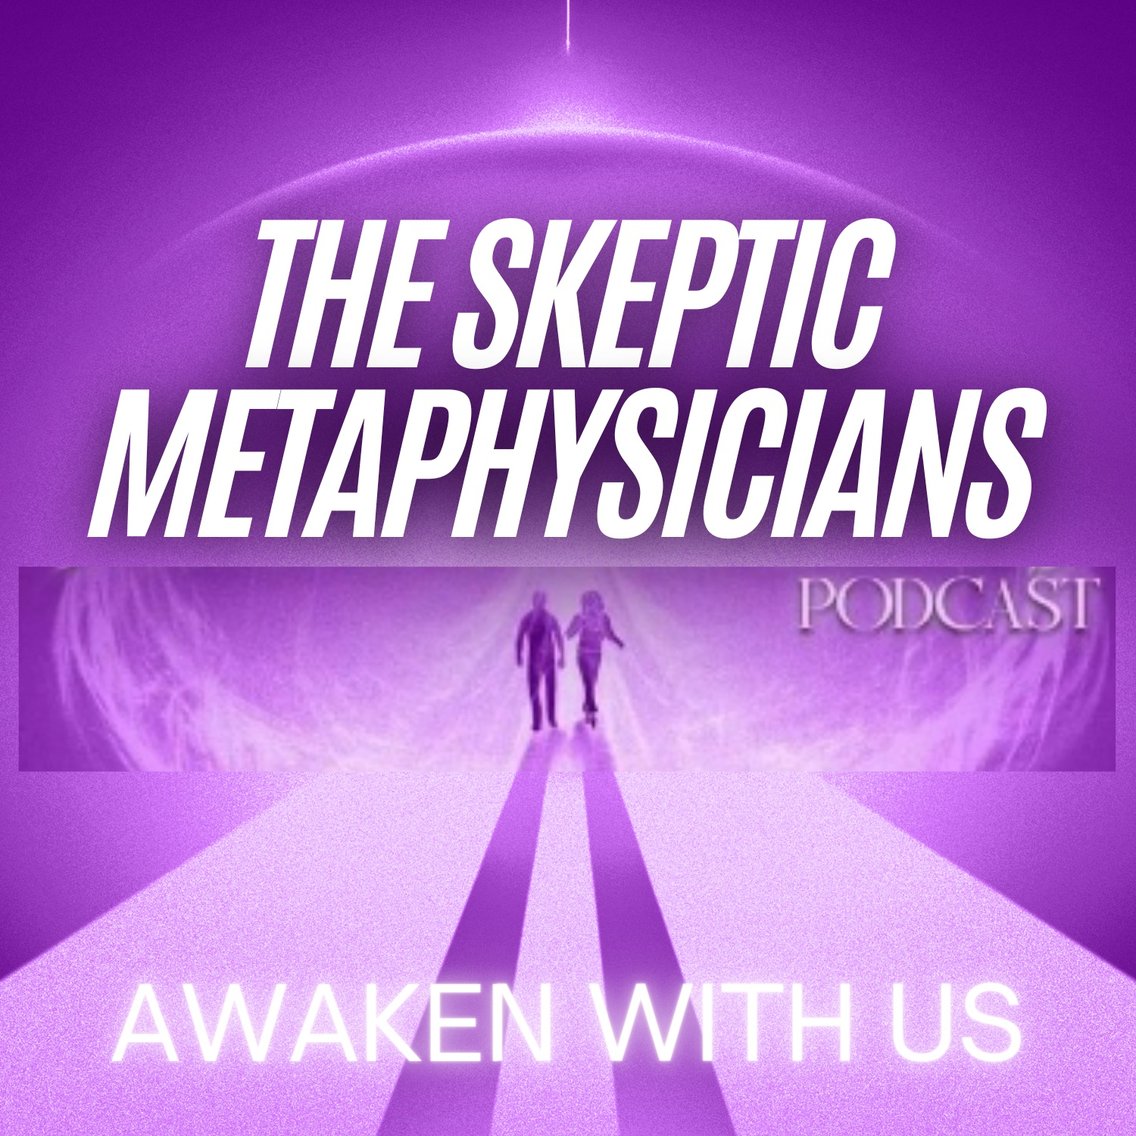 The Skeptic Metaphysicians - Metaphysics, Spiritual Awakenings and Expanded Consciousness - Cover Image